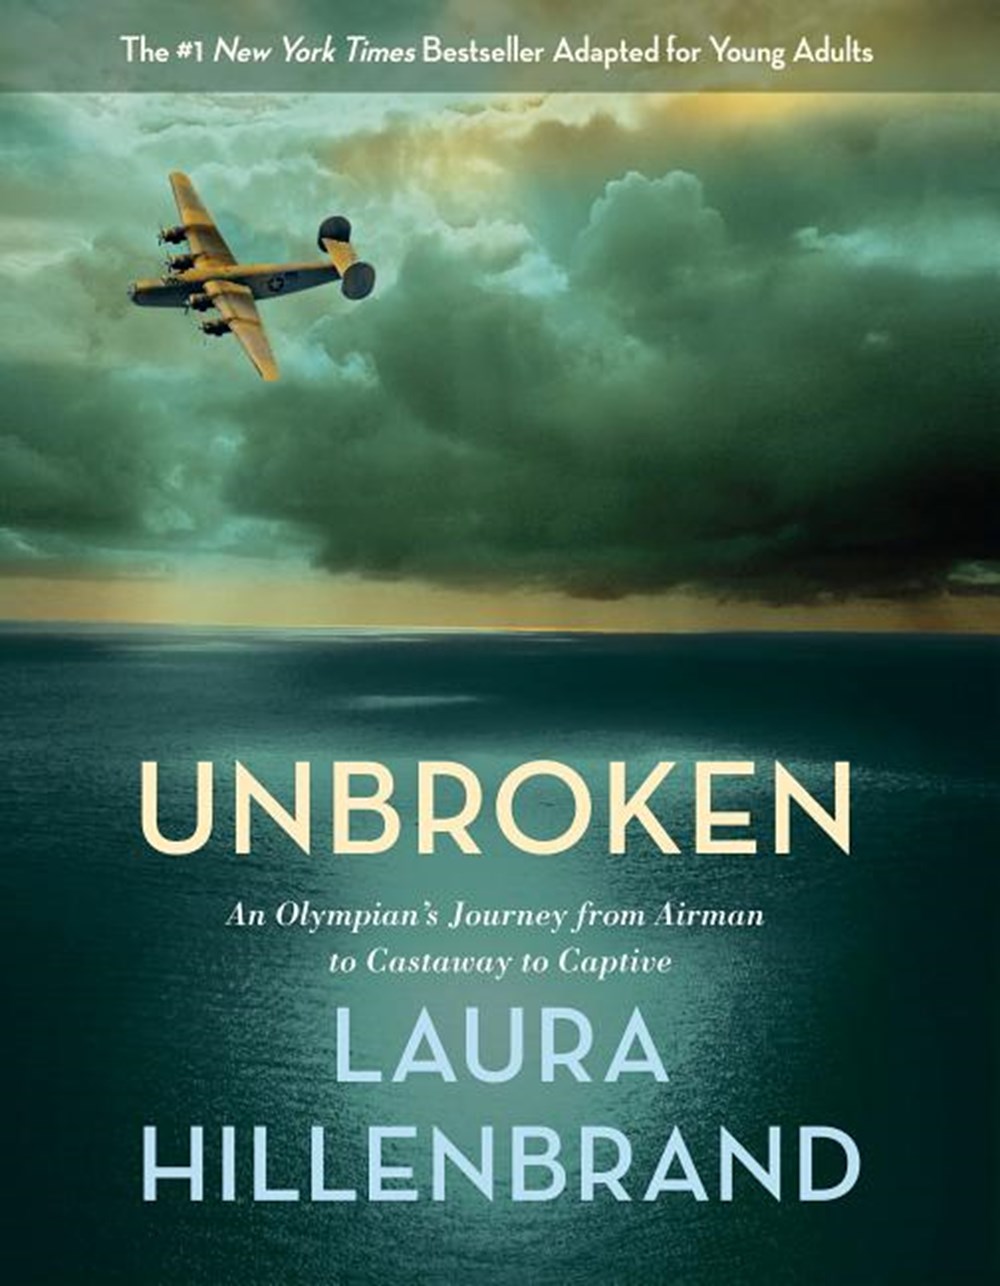 Unbroken: An Olympian's Journey from Airman to Castaway to Captive (Young Adult Adaptation)